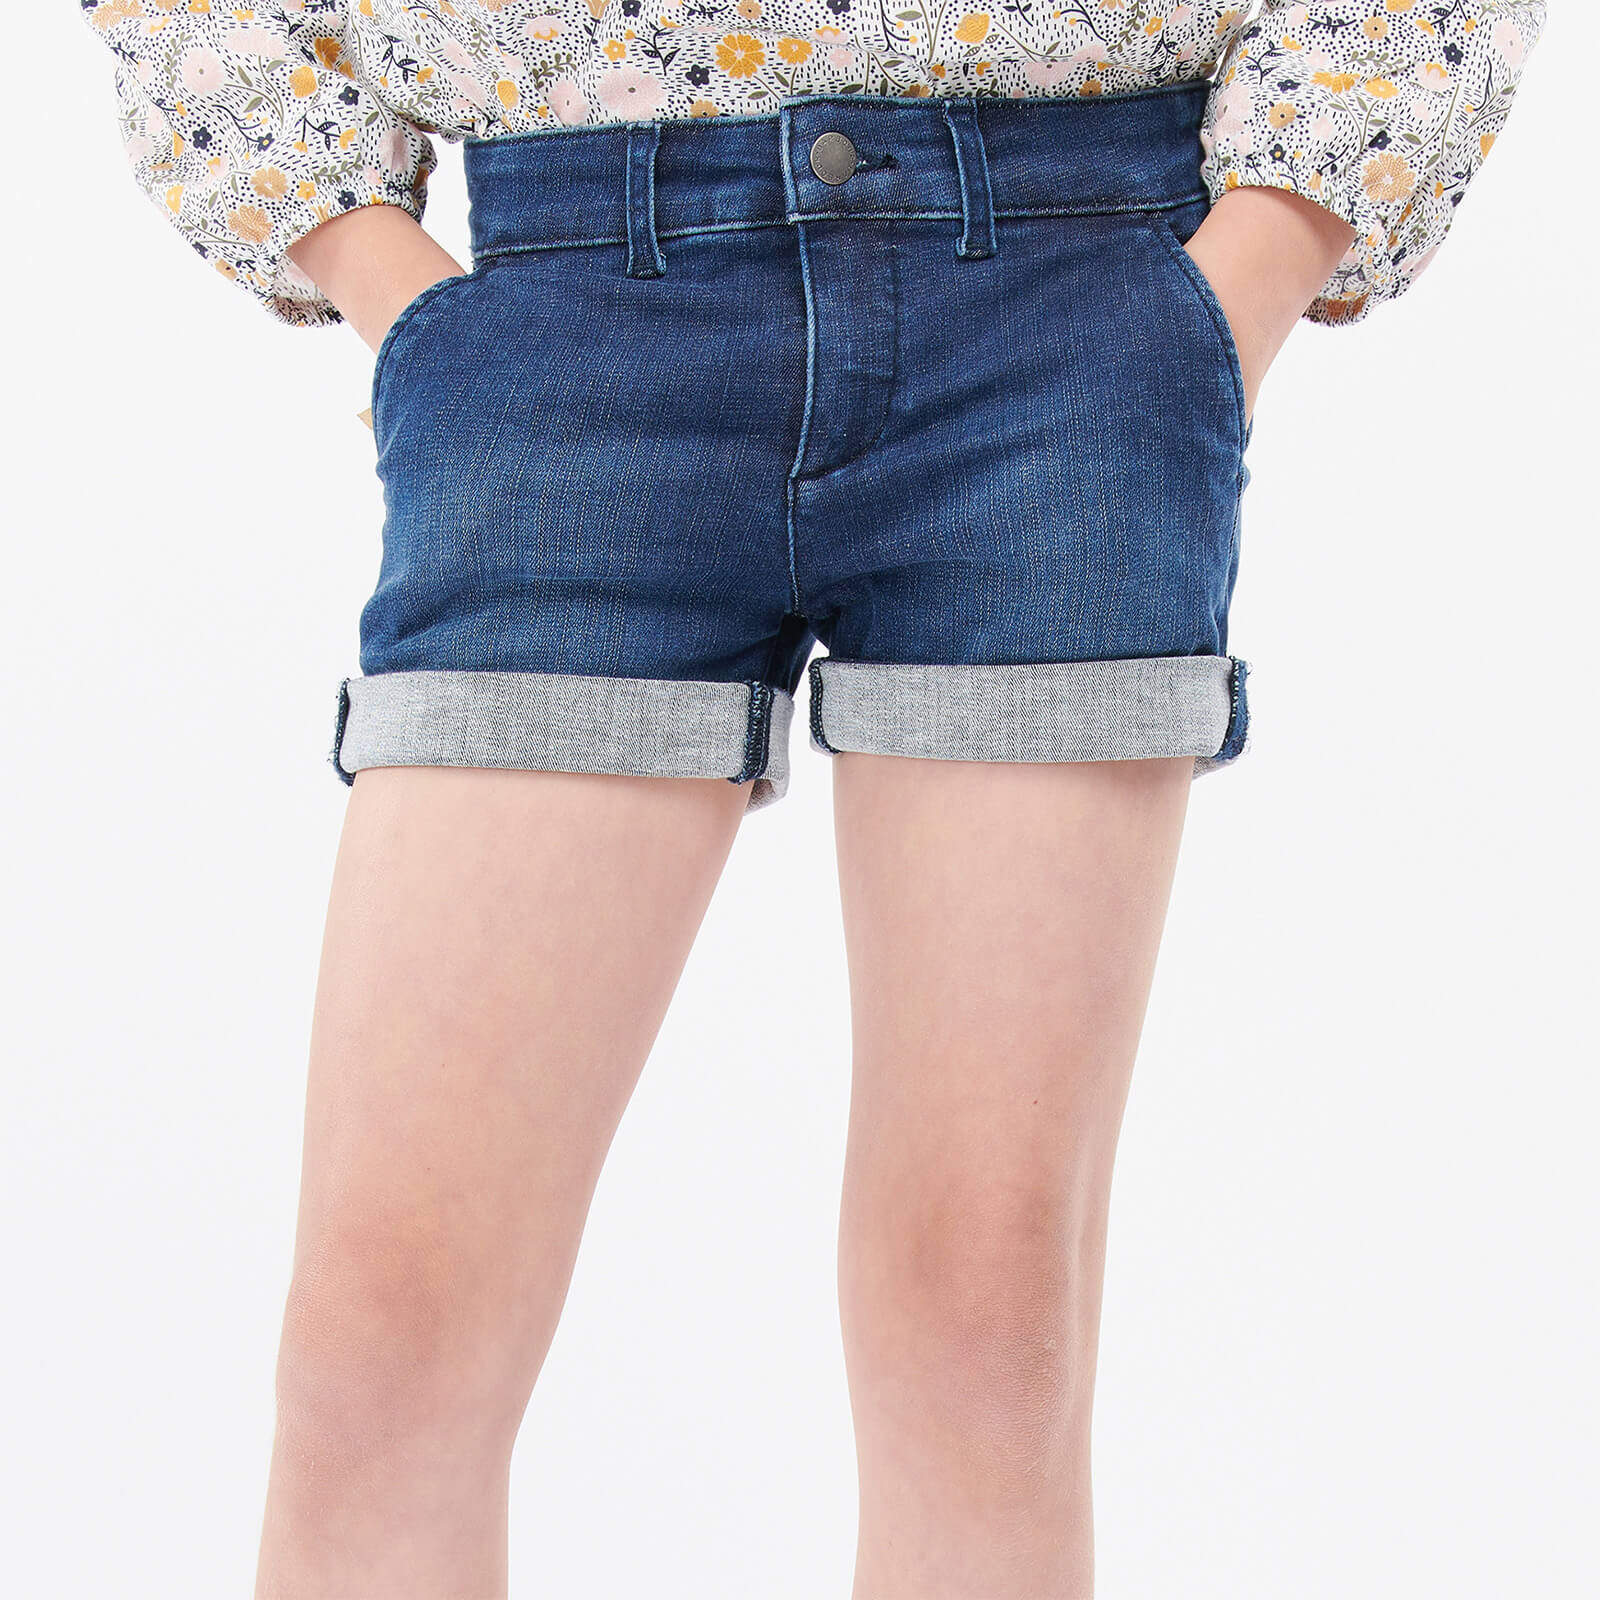 Barbour Girls' Essential Denim Shorts - Authentic Wash -  6-7 Years